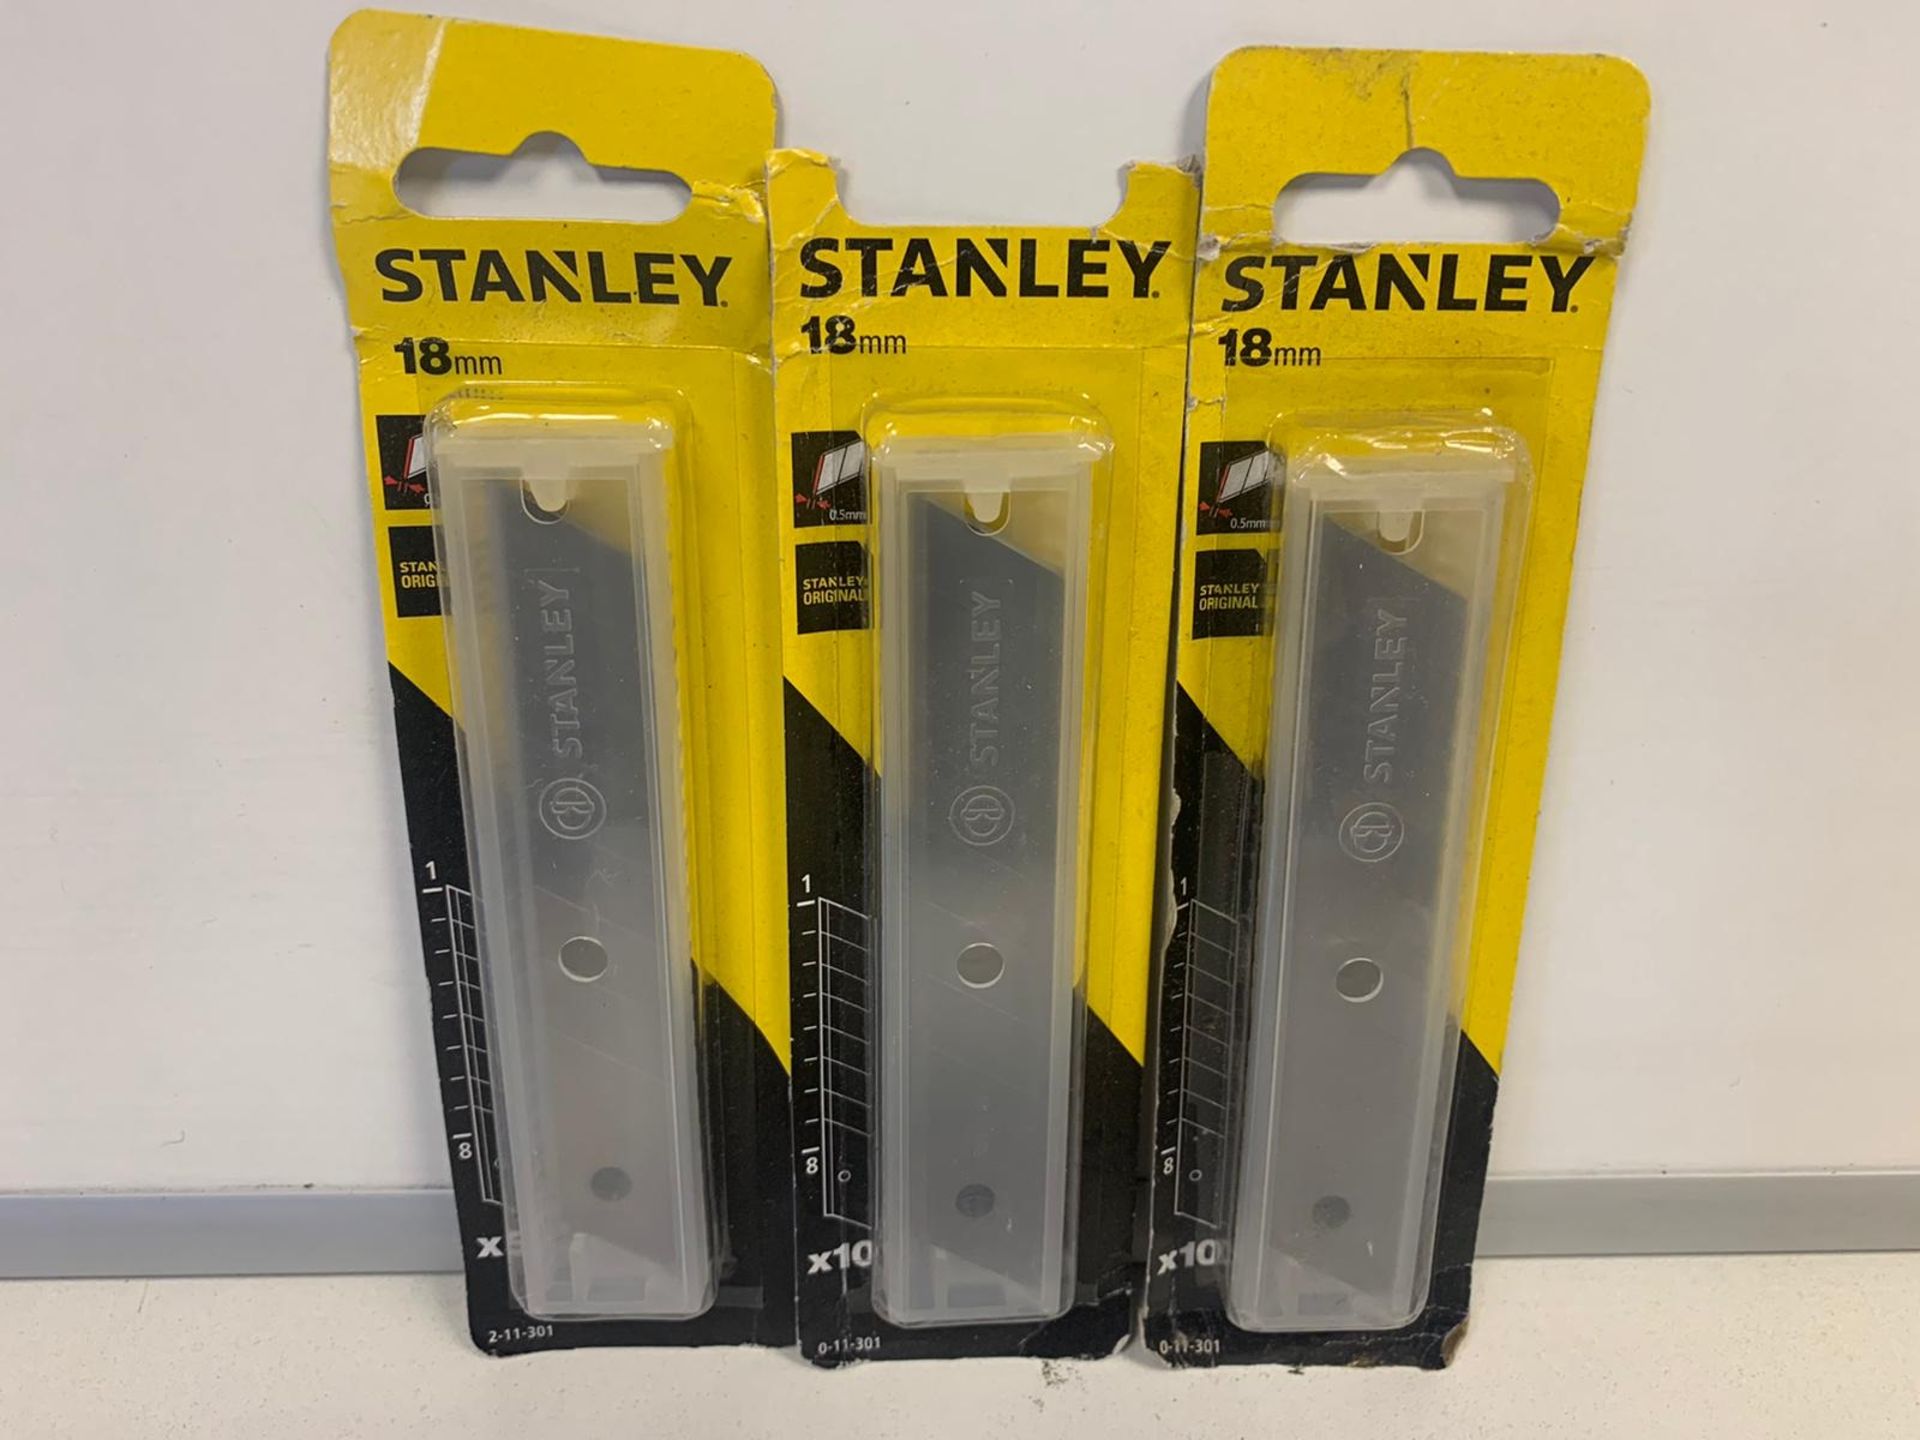 12 X BRAND NEW PACKS OF 10 18MM STANLEY REPLACEMENT BLADES